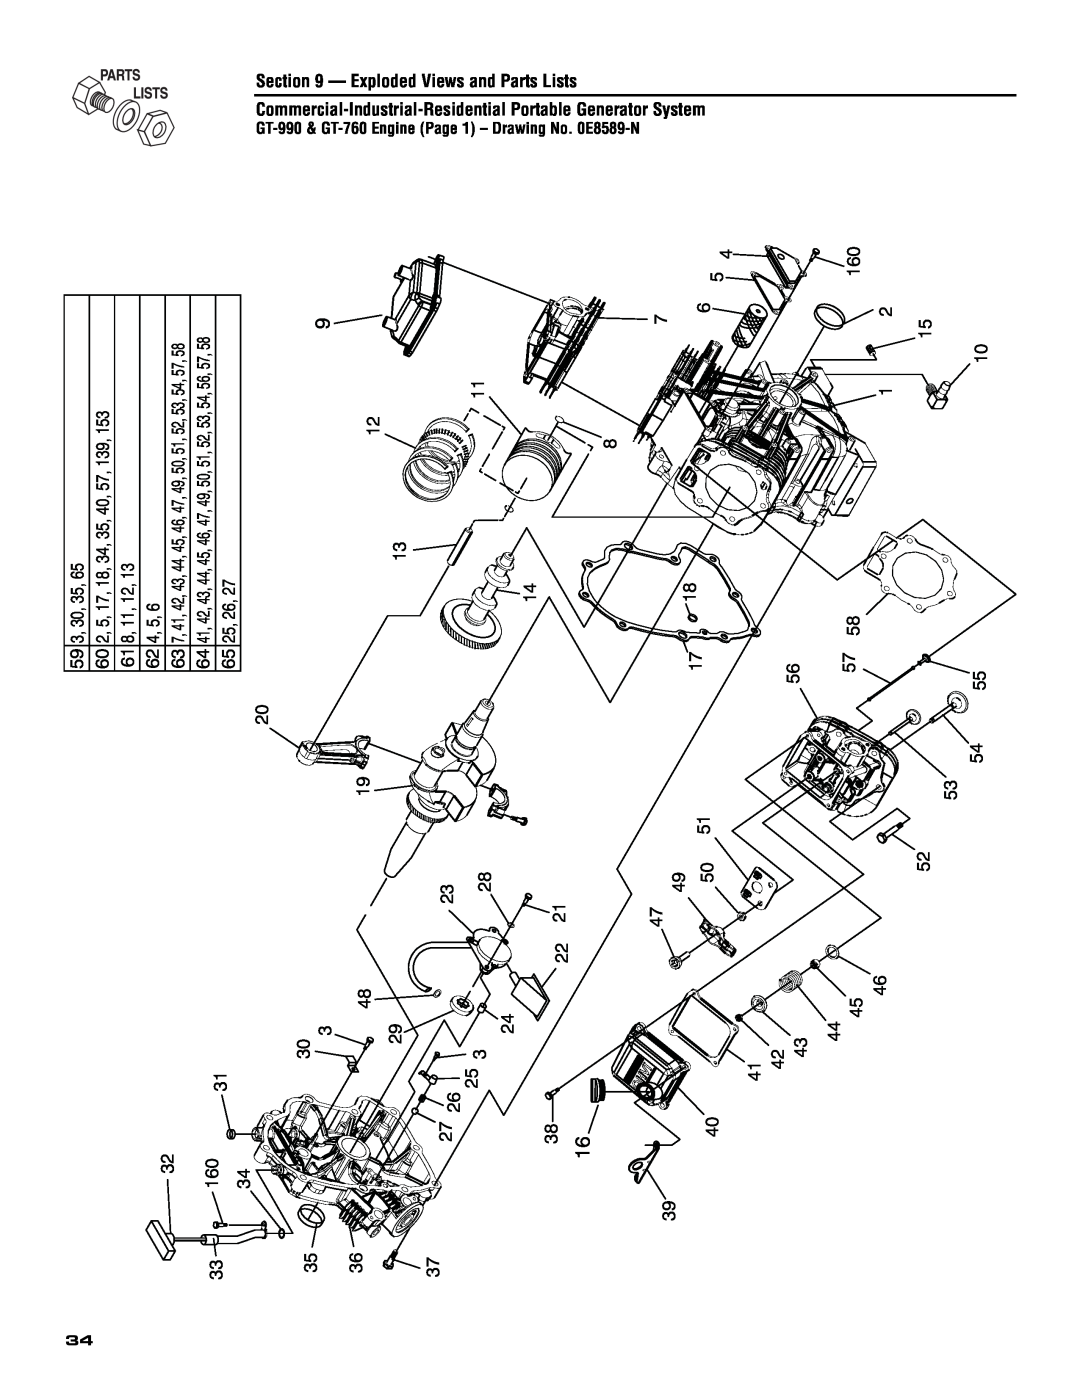 Generac 005308-0 14 22, System, Exploded Views and Parts Lists, GT-990 & GT-760 Engine Page 1 - Drawing No, Generator 